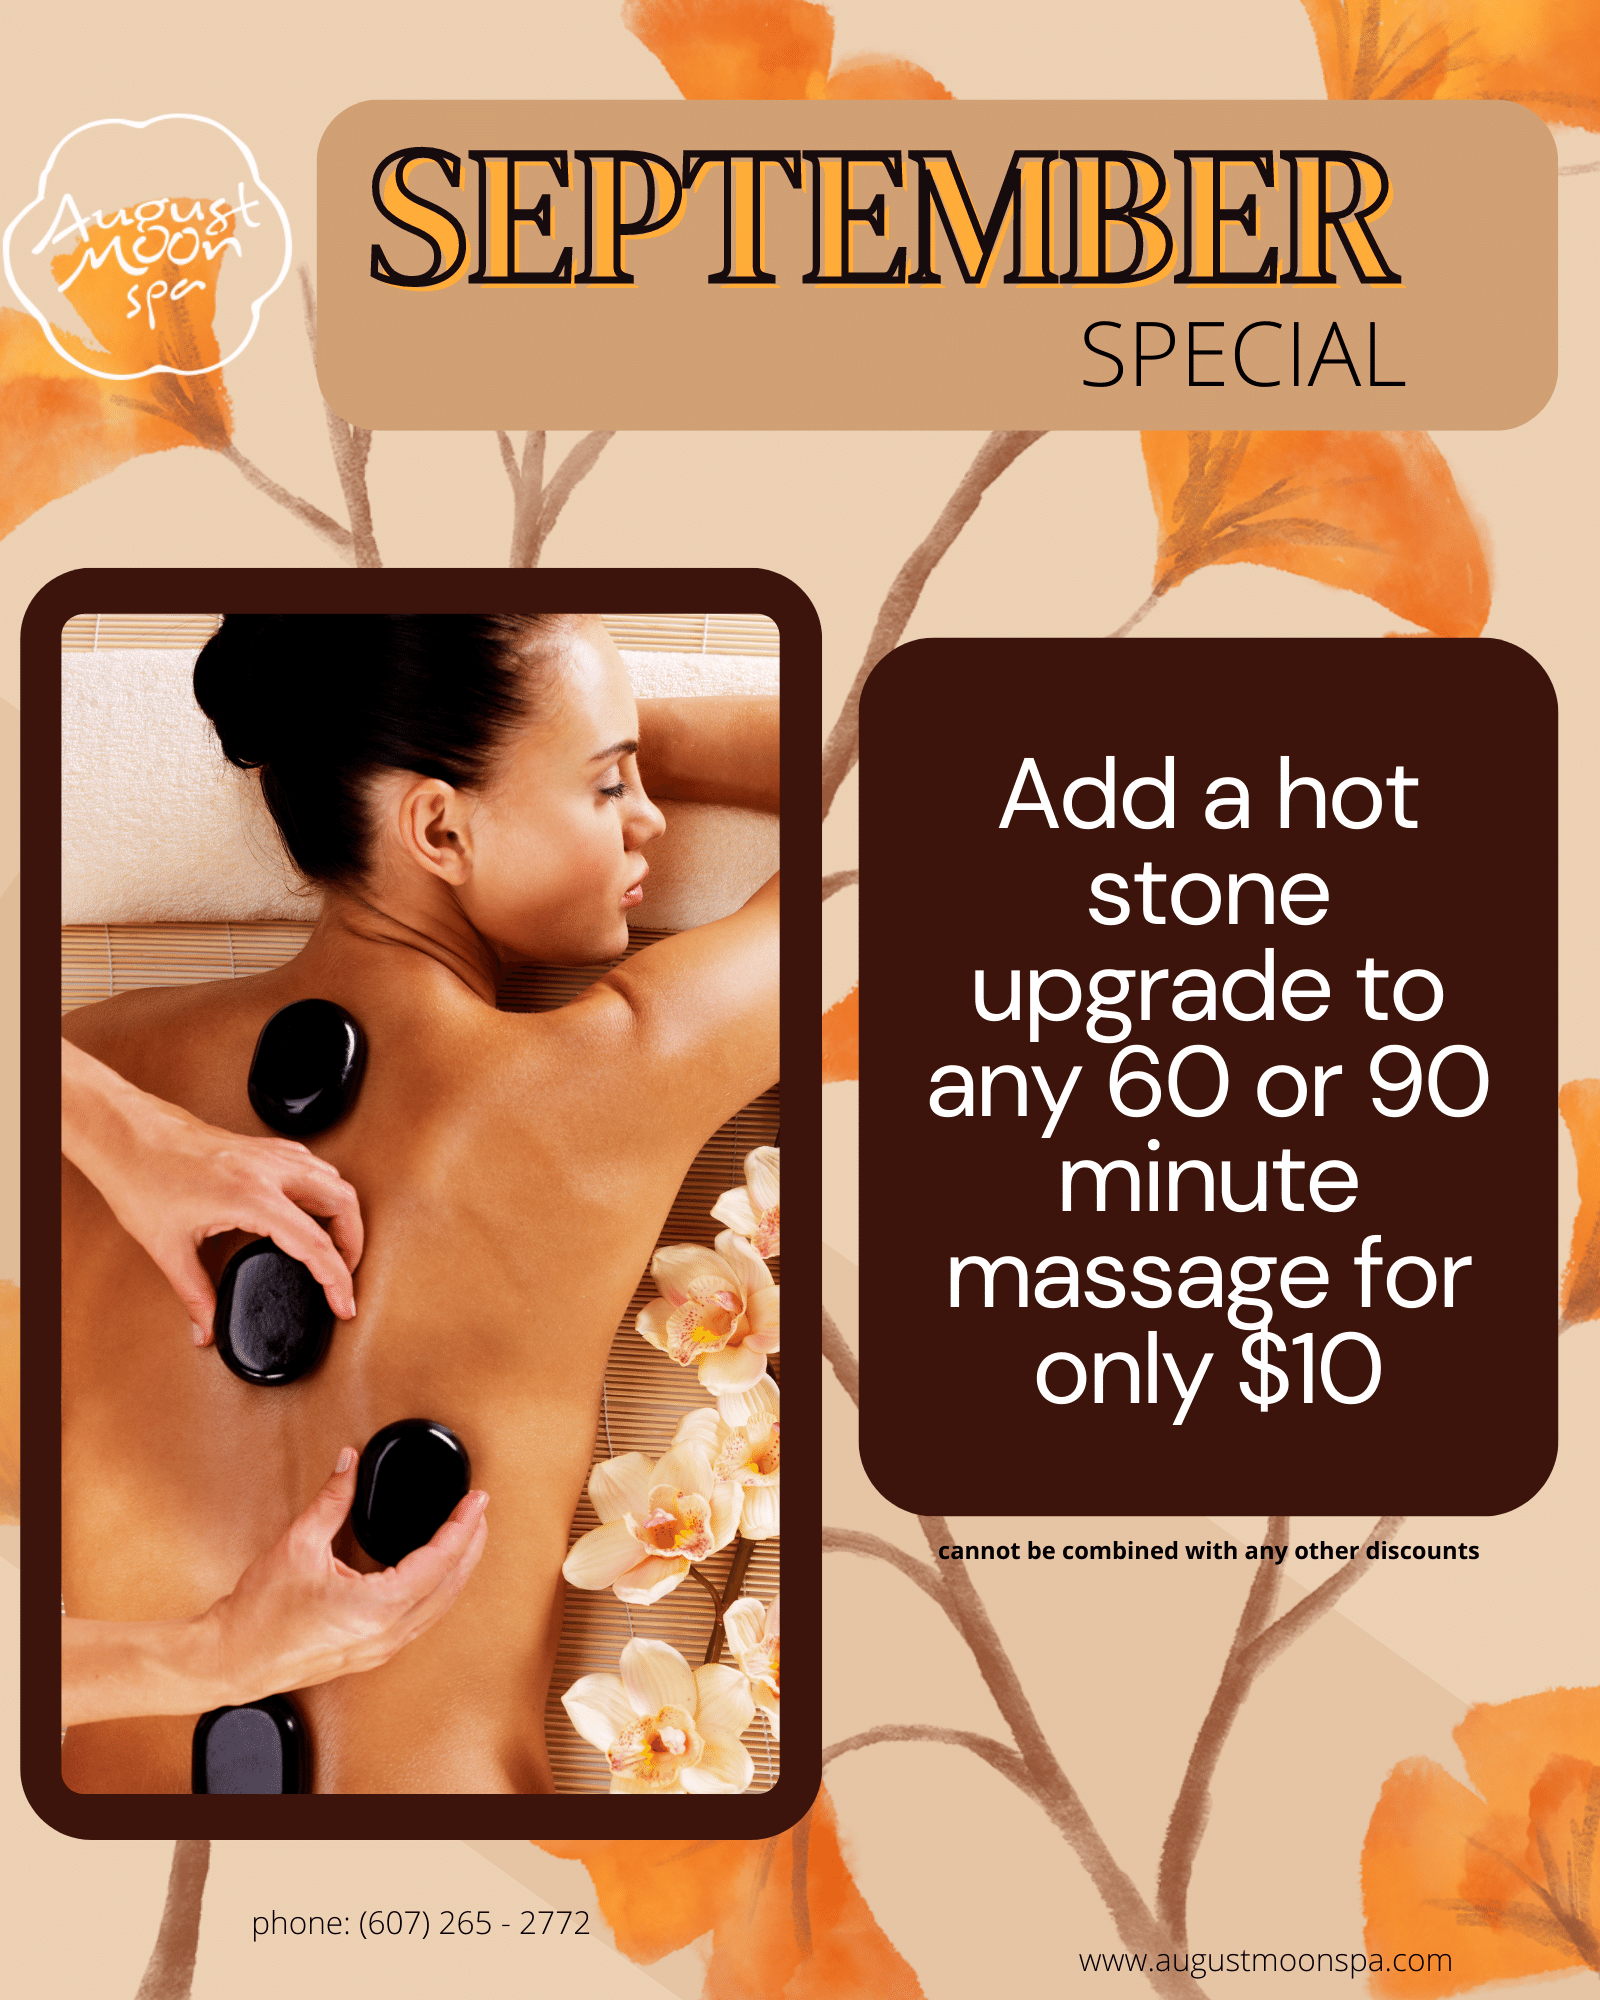 Image of a woman receiving hot stones on her back. September special. Upgrade any 60 or 90 minute classic massage to hot stones for only $10! 